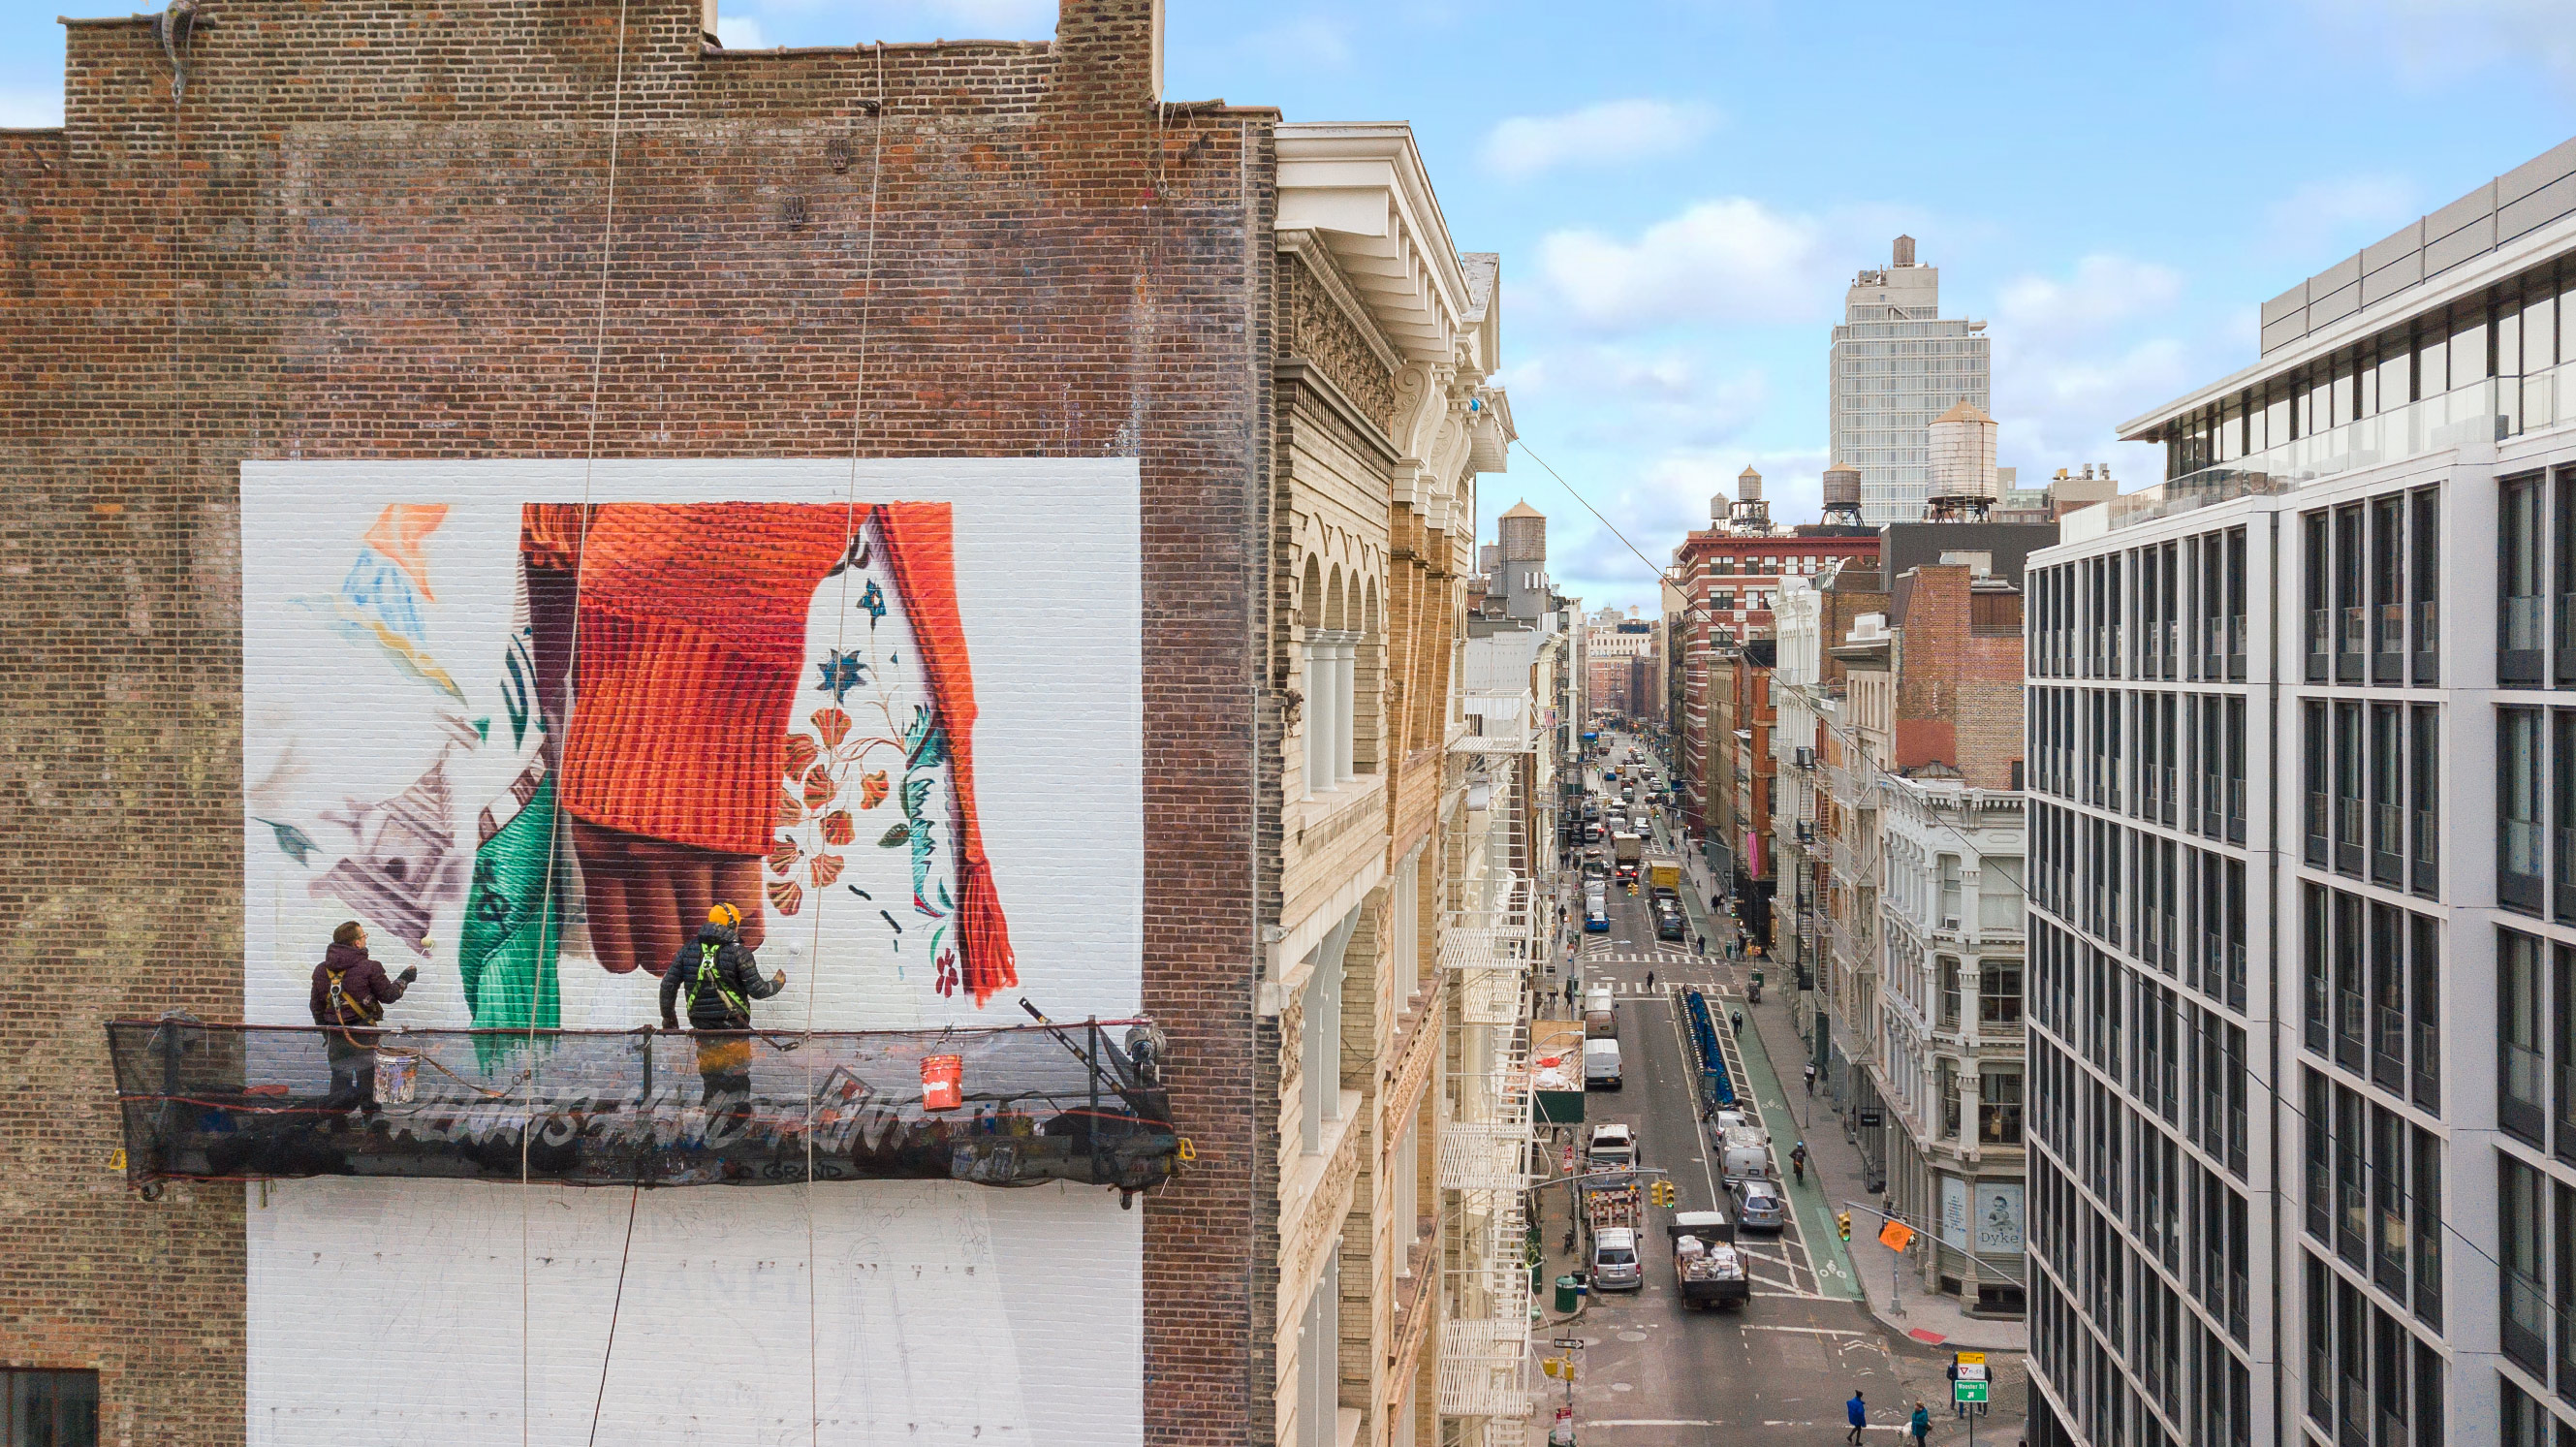 Large outdoor mural in New York painted by Colossal Media